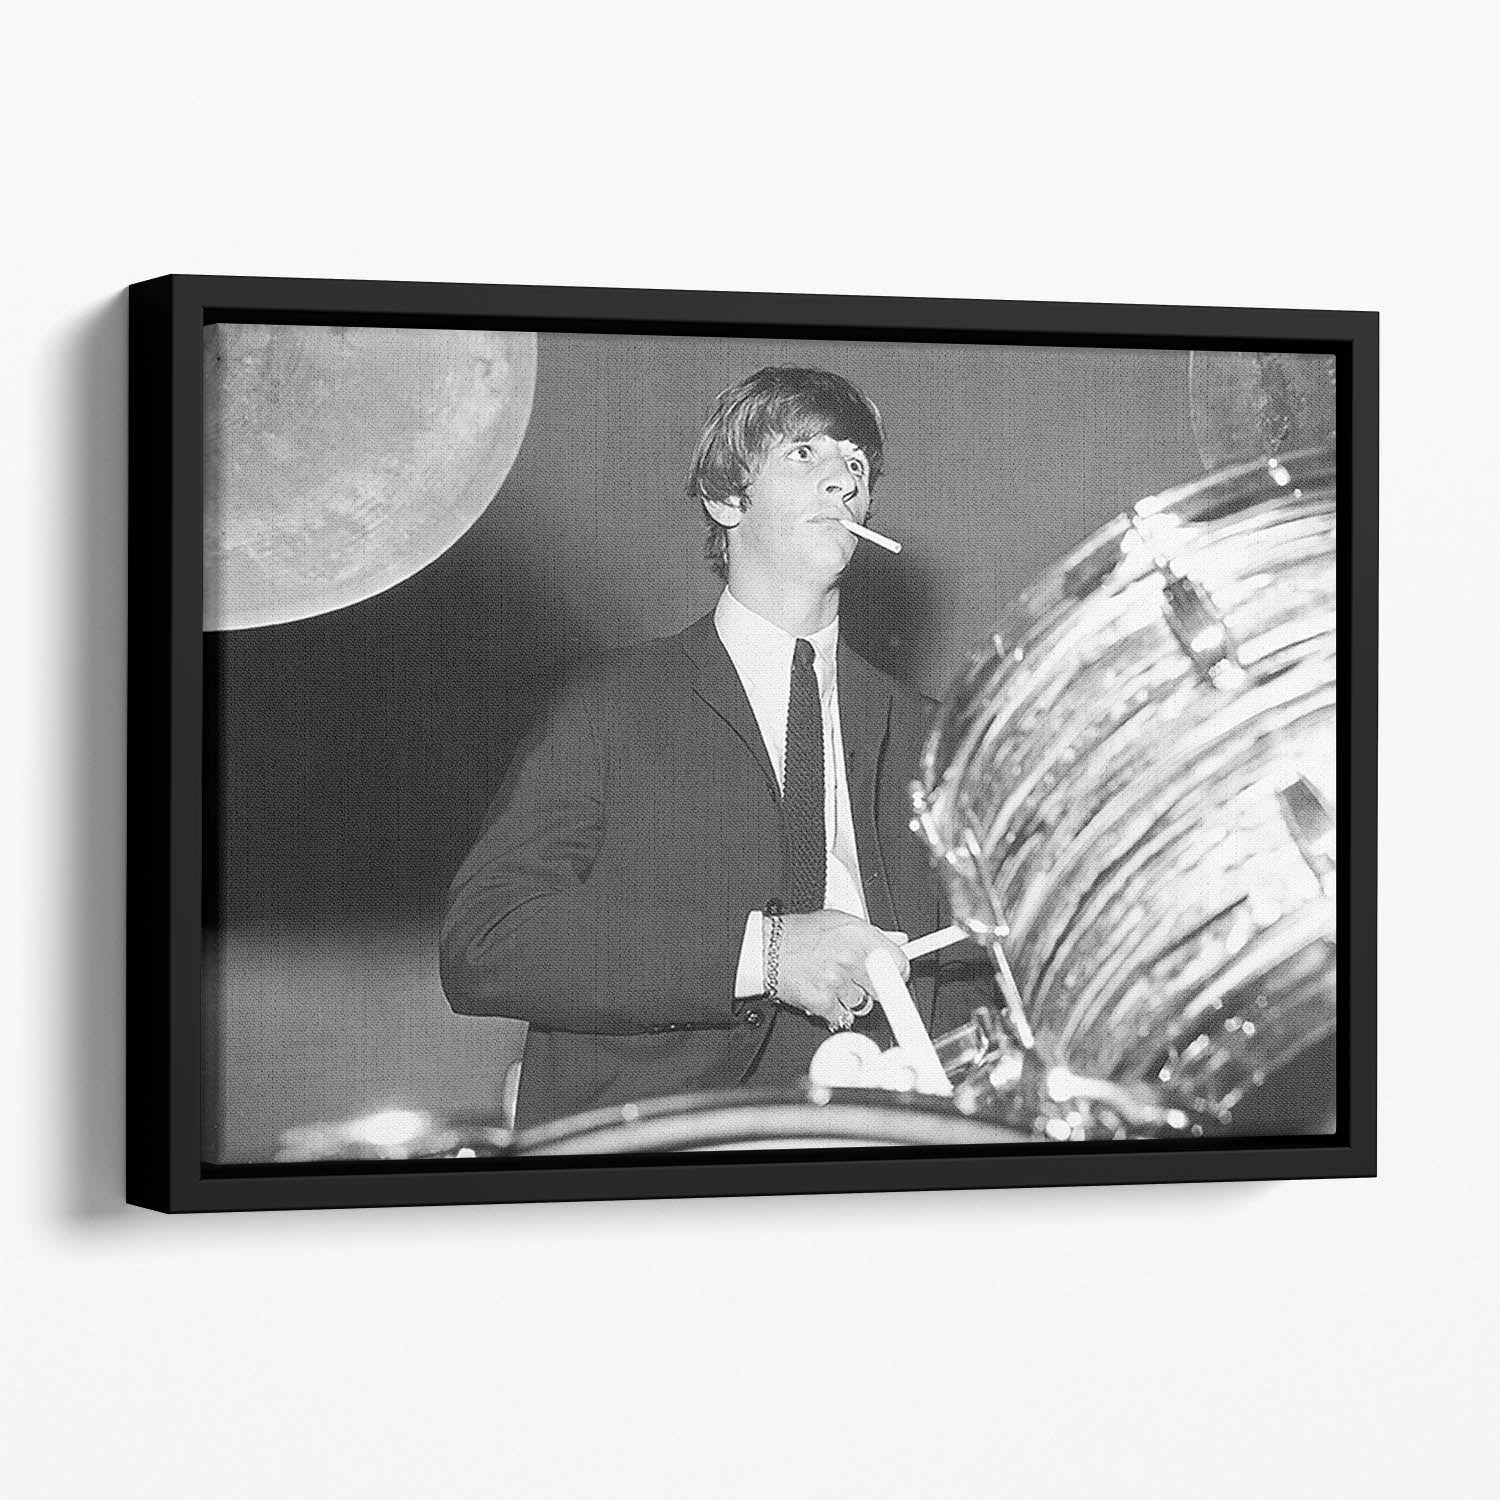 Ringo Starr playing the drums Floating Framed Canvas